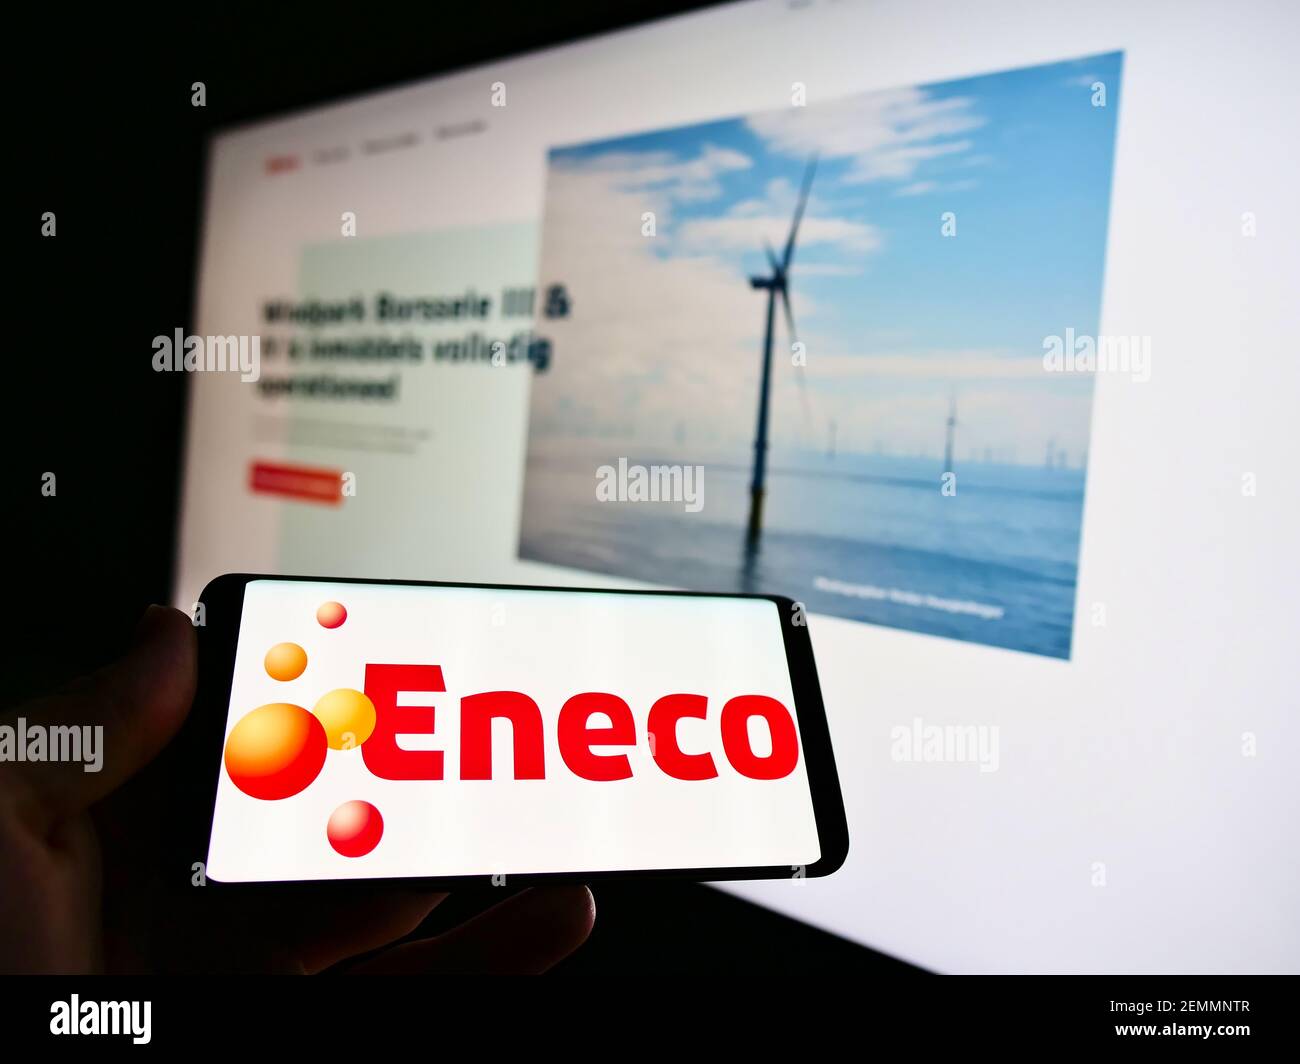 Person holding mobile phone with business logo of Dutch utility company Eneco Groep N.V. on screen in front of web page. Focus on cellphone display. Stock Photo